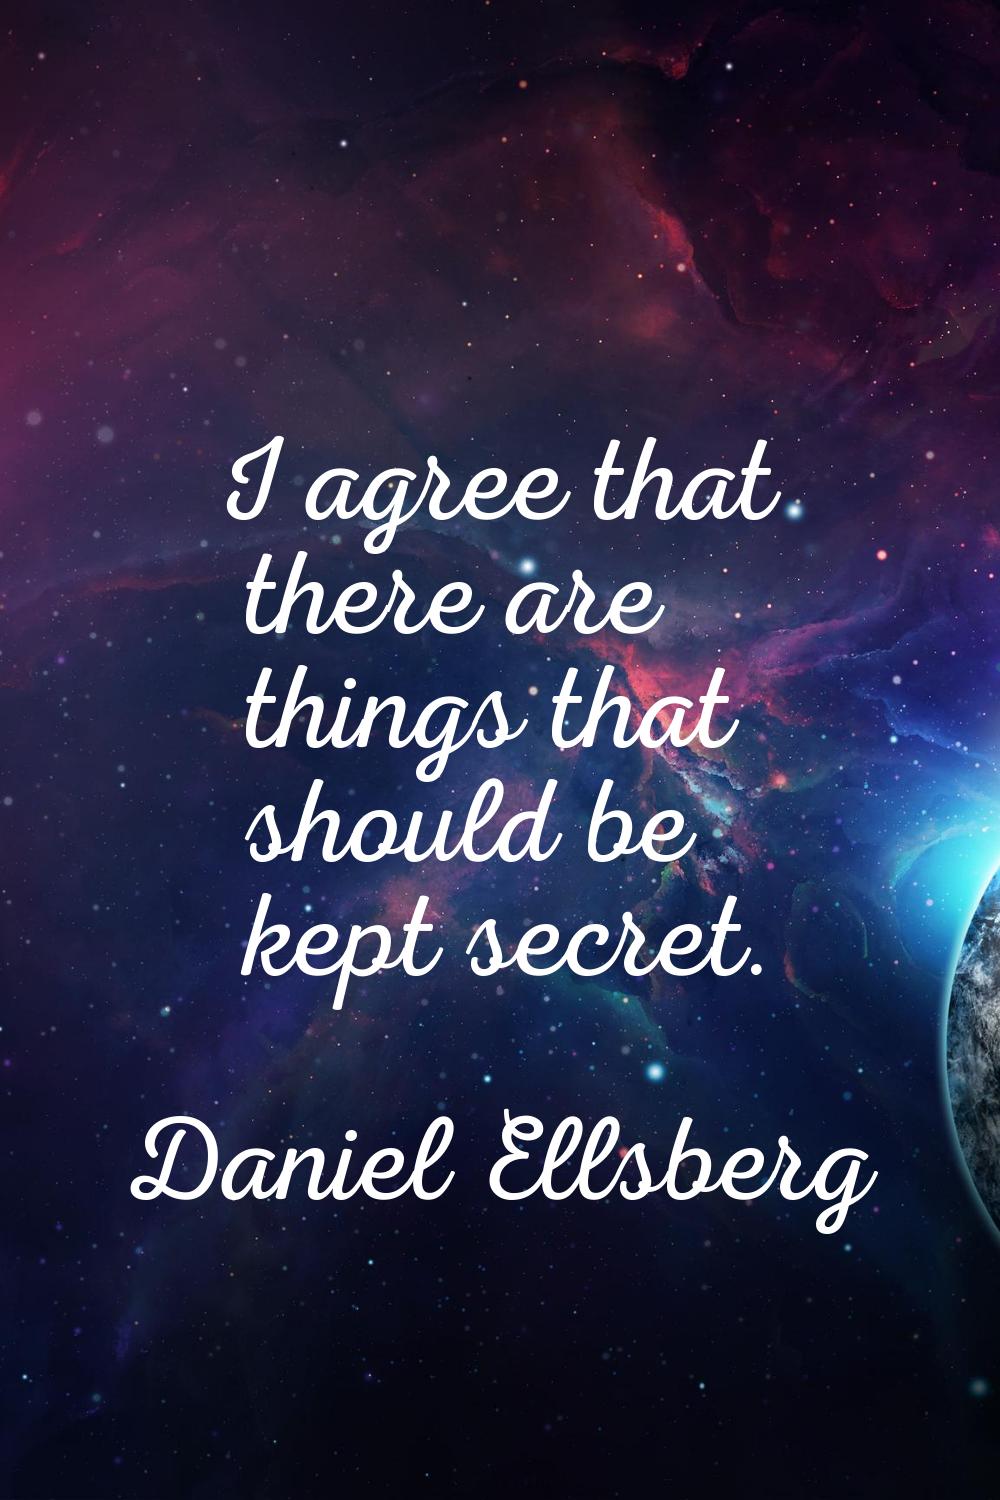 I agree that there are things that should be kept secret.